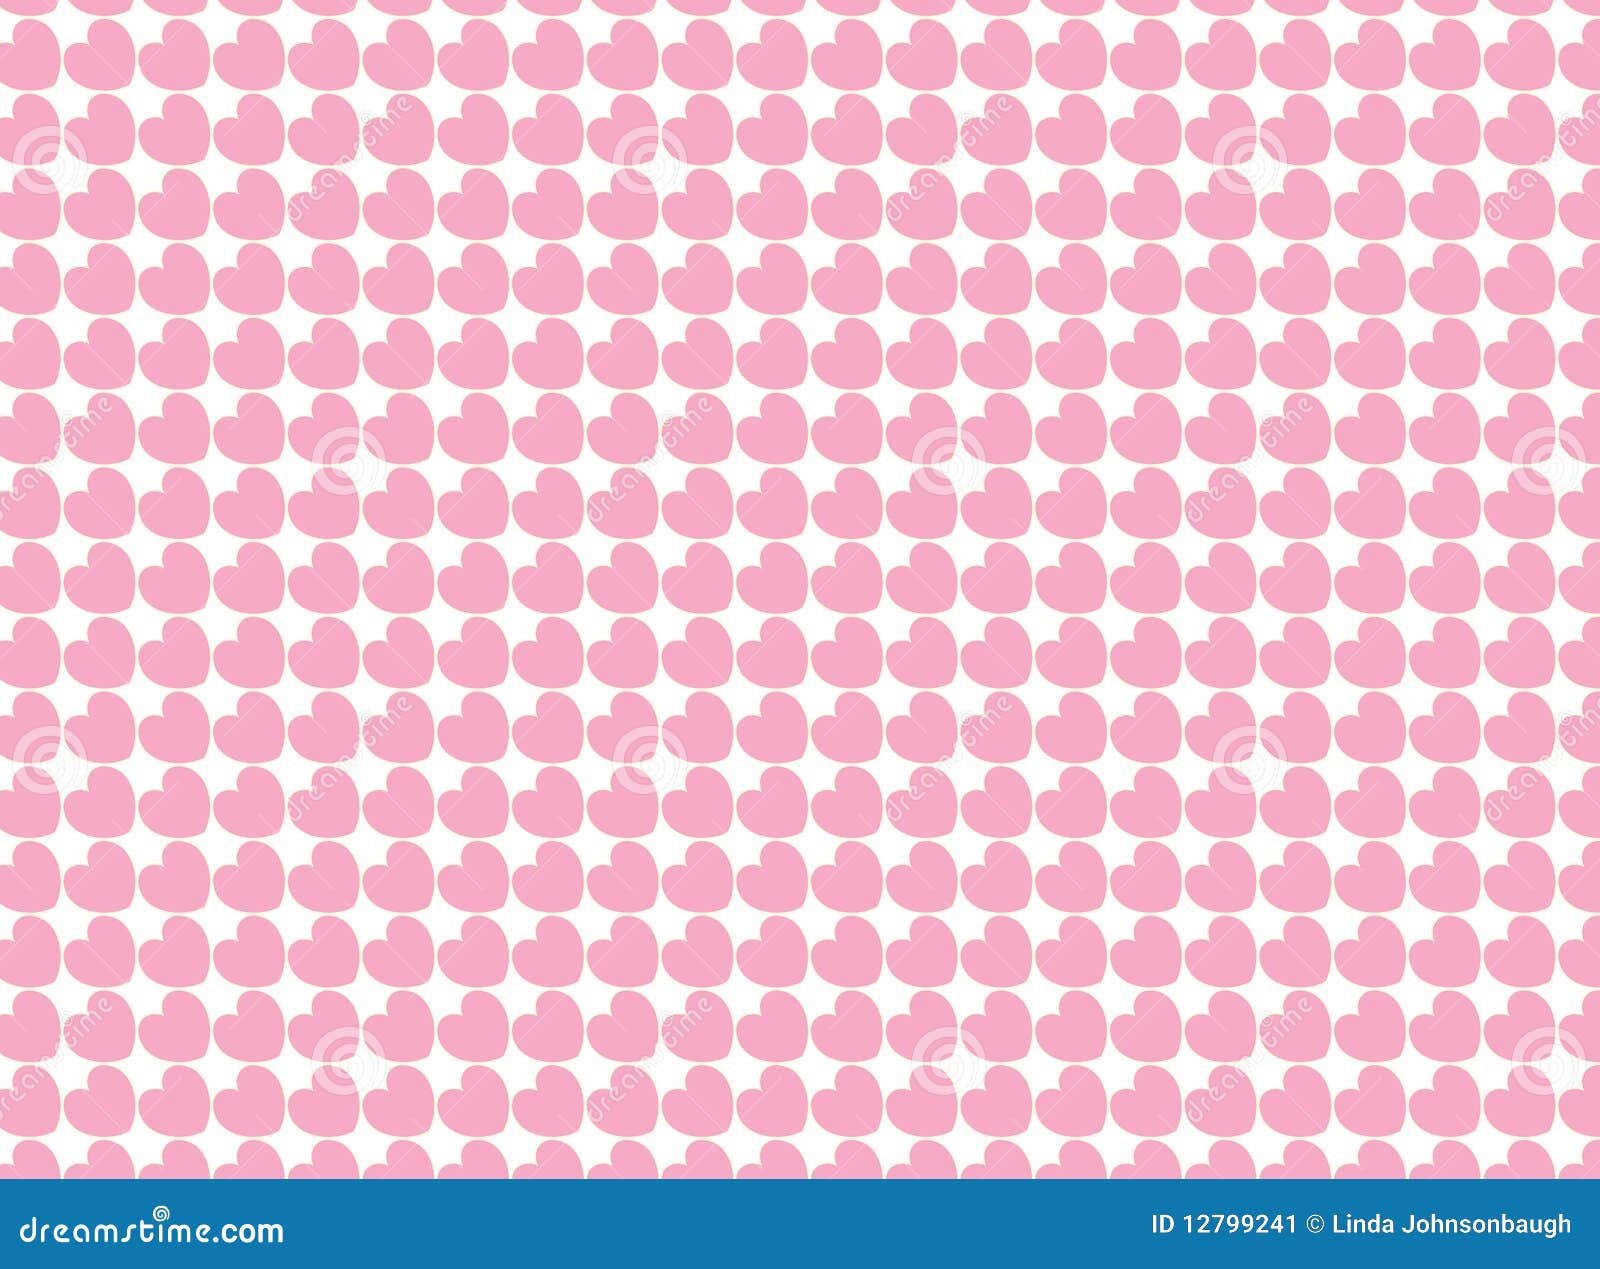  swatch heart striped fabric background